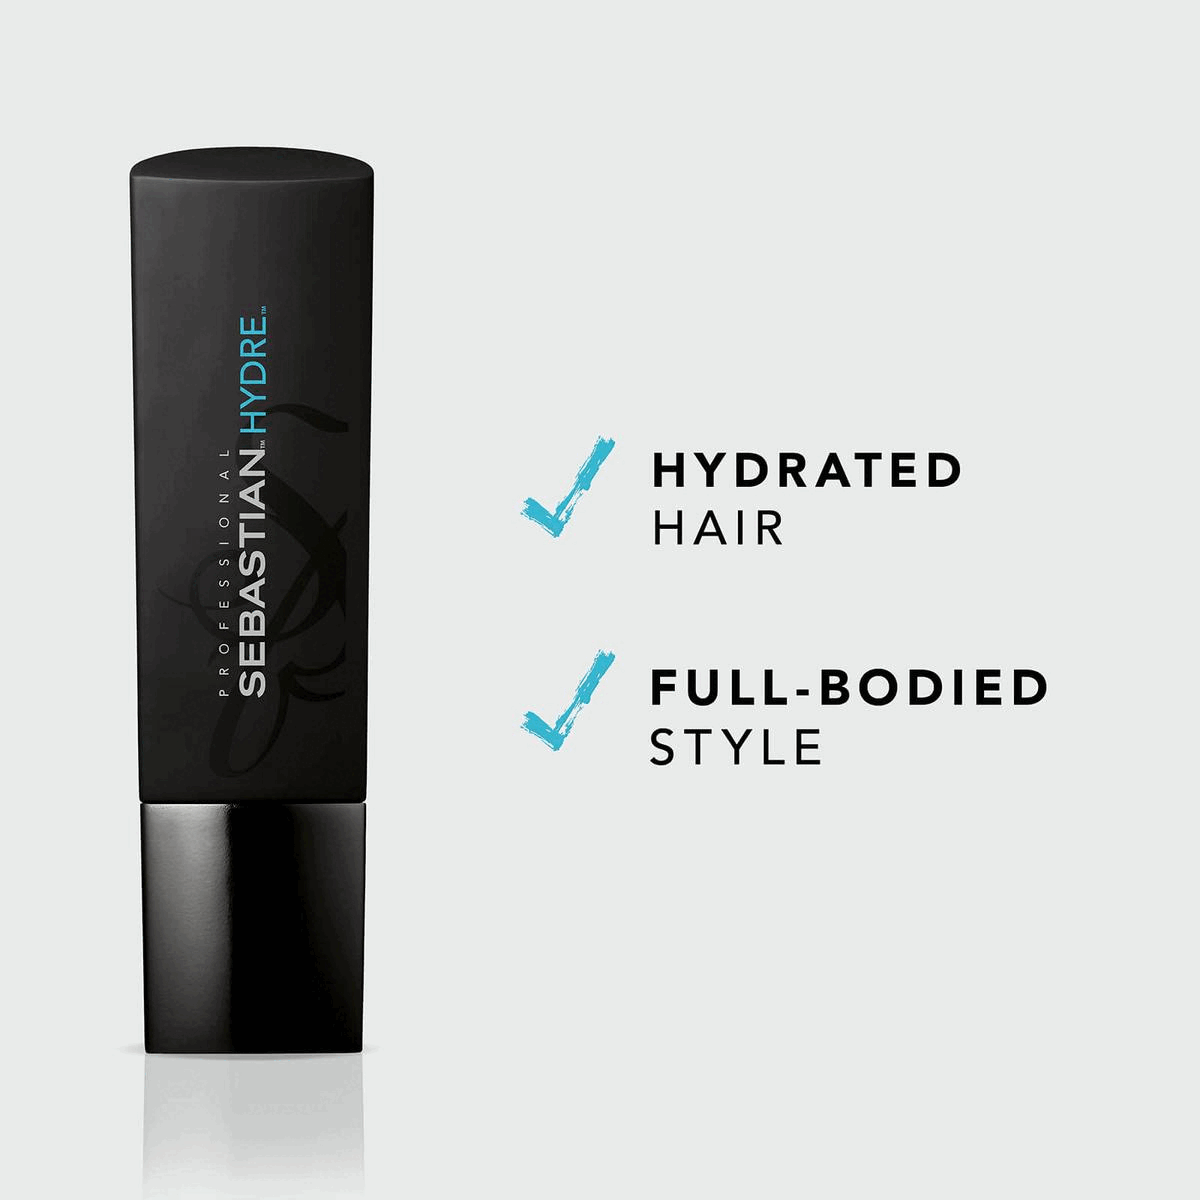 Hydrated hair, full-bodied style
            How to use - Massage shampoo into wet hair, rinse thoroughly, repeat if necessary Combine with hydre conditioner & hydre treatment for best results
            